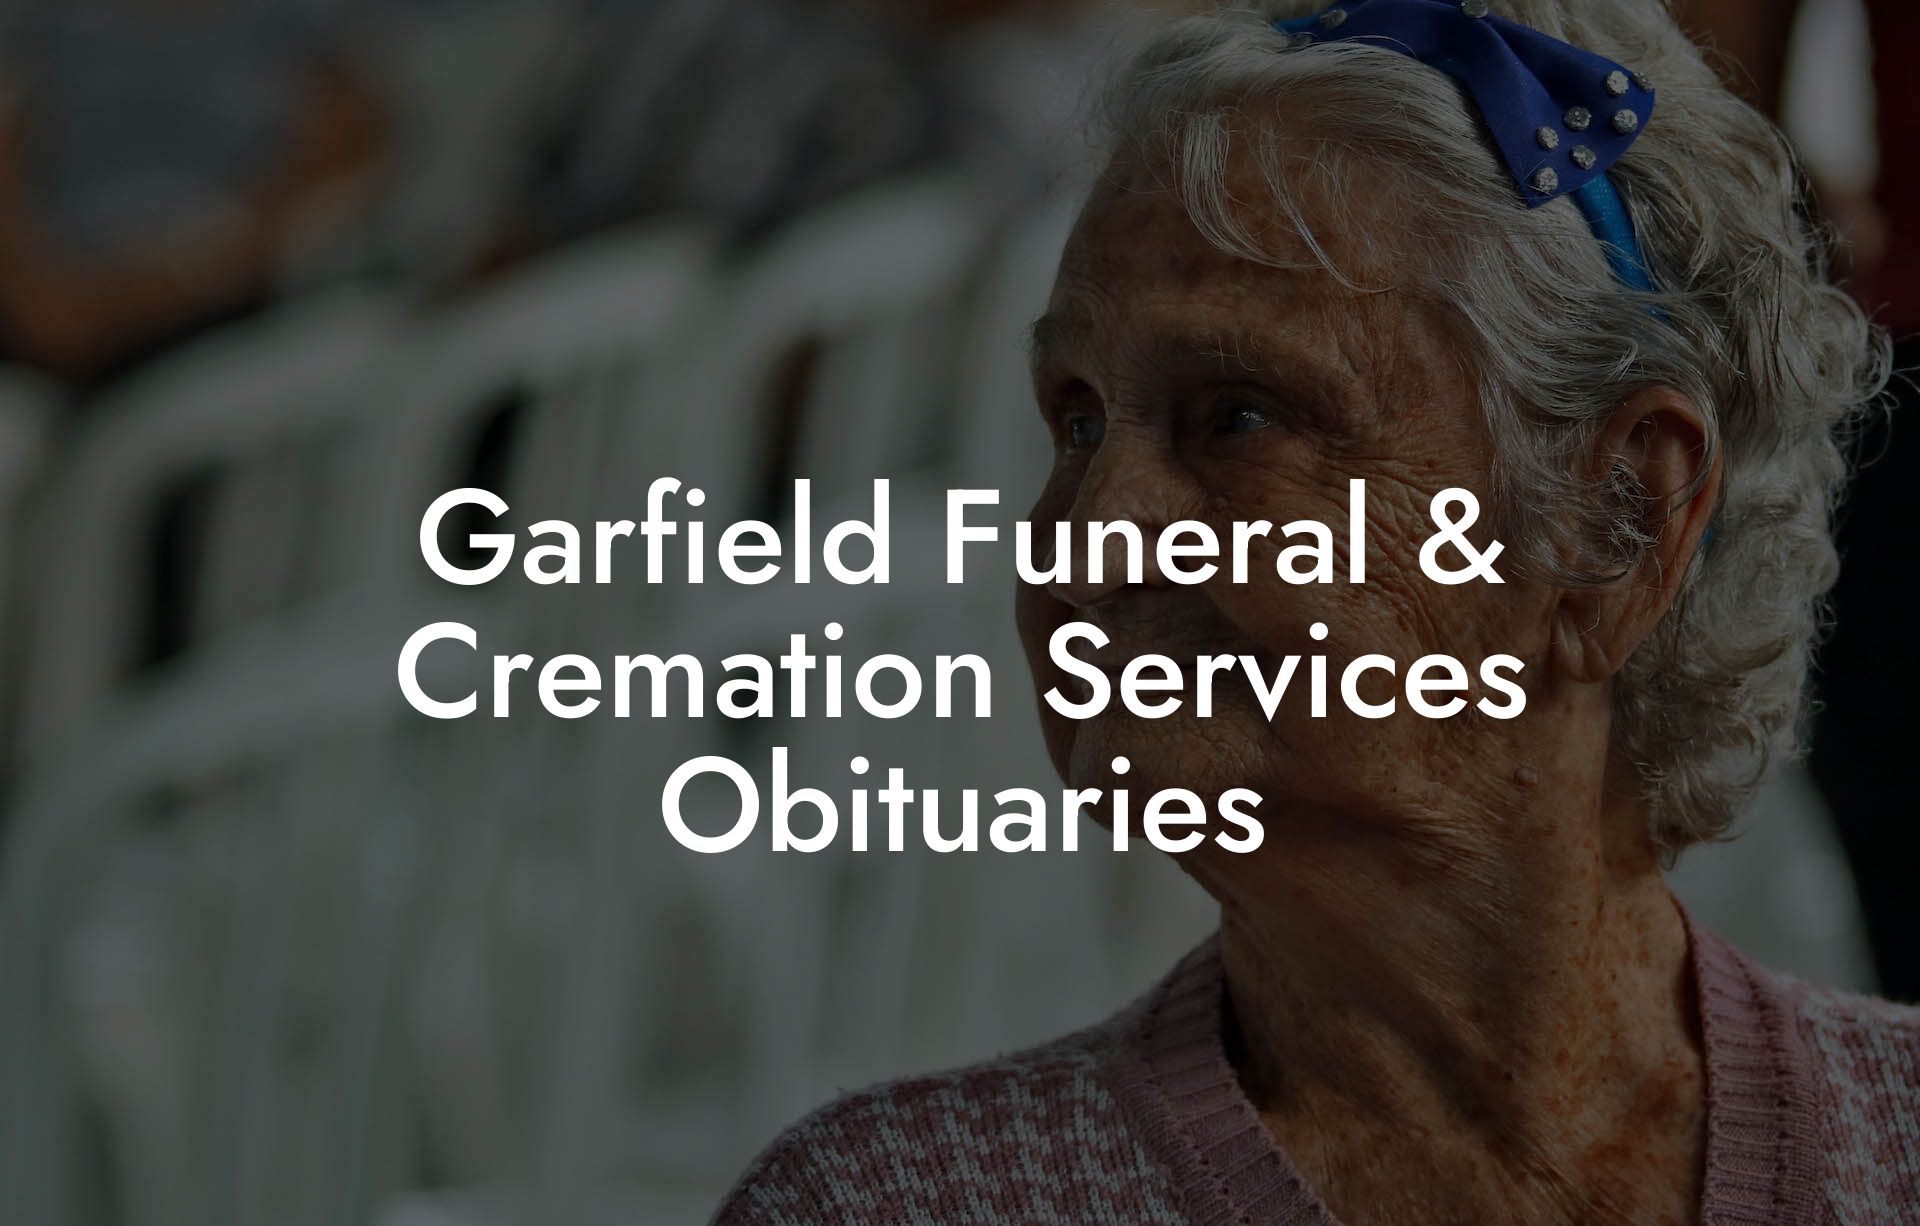 Garfield Funeral & Cremation Services Obituaries